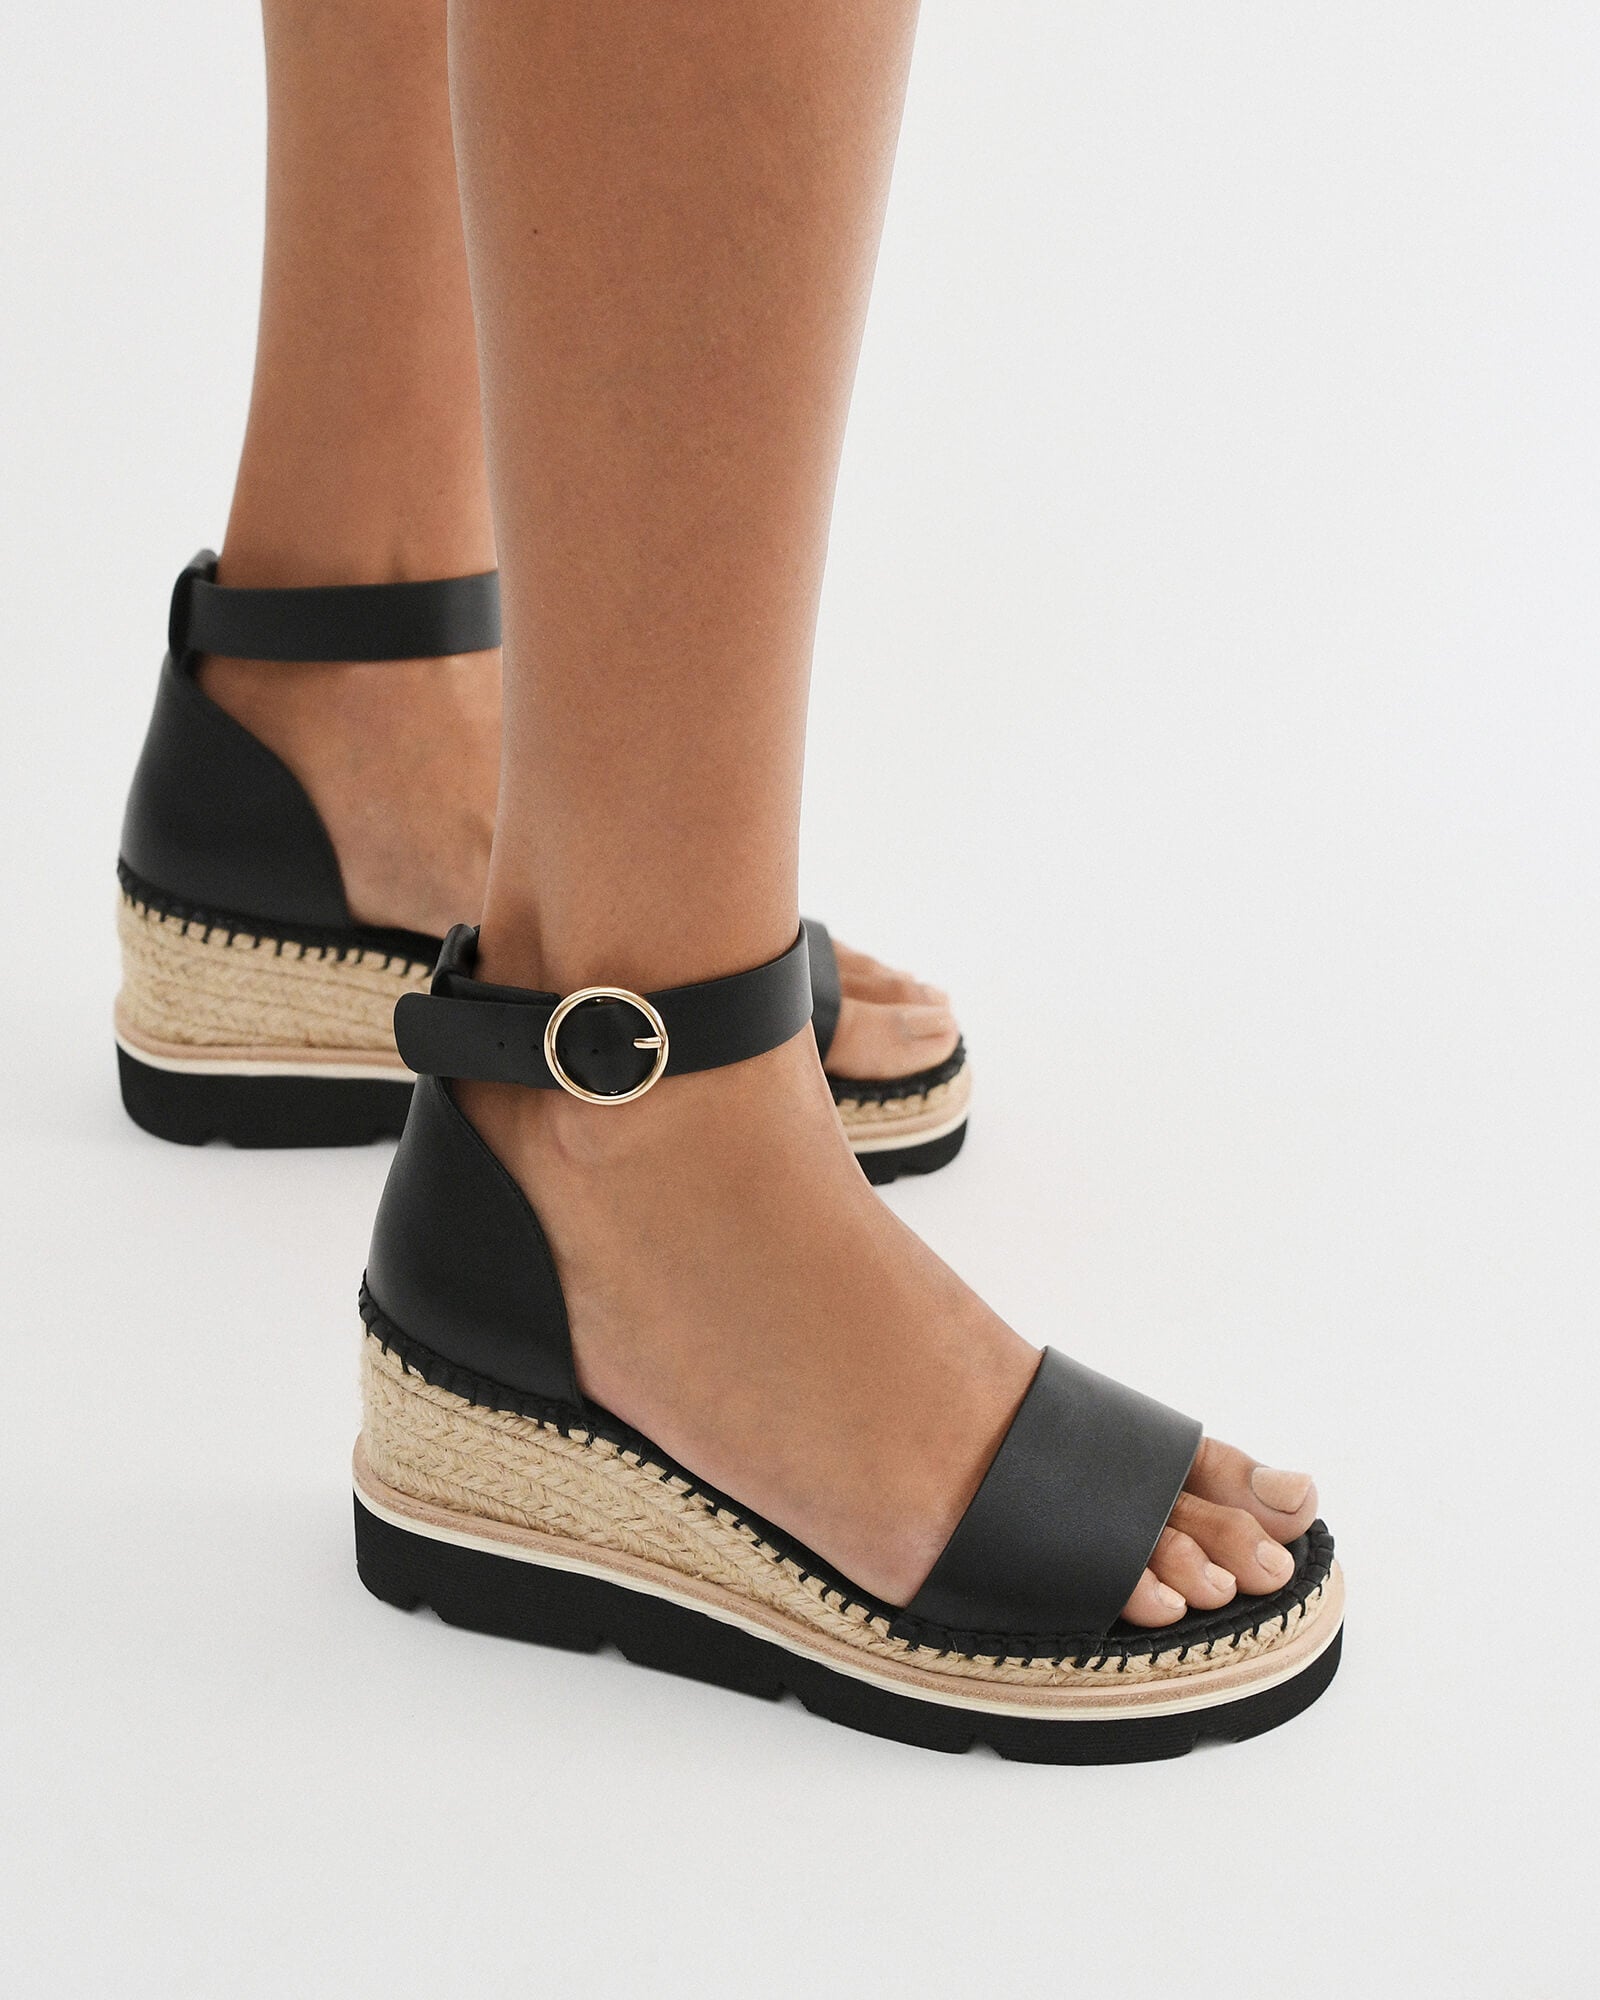 Wedges  Buy Wedge Shoes Online Australia - THE ICONIC